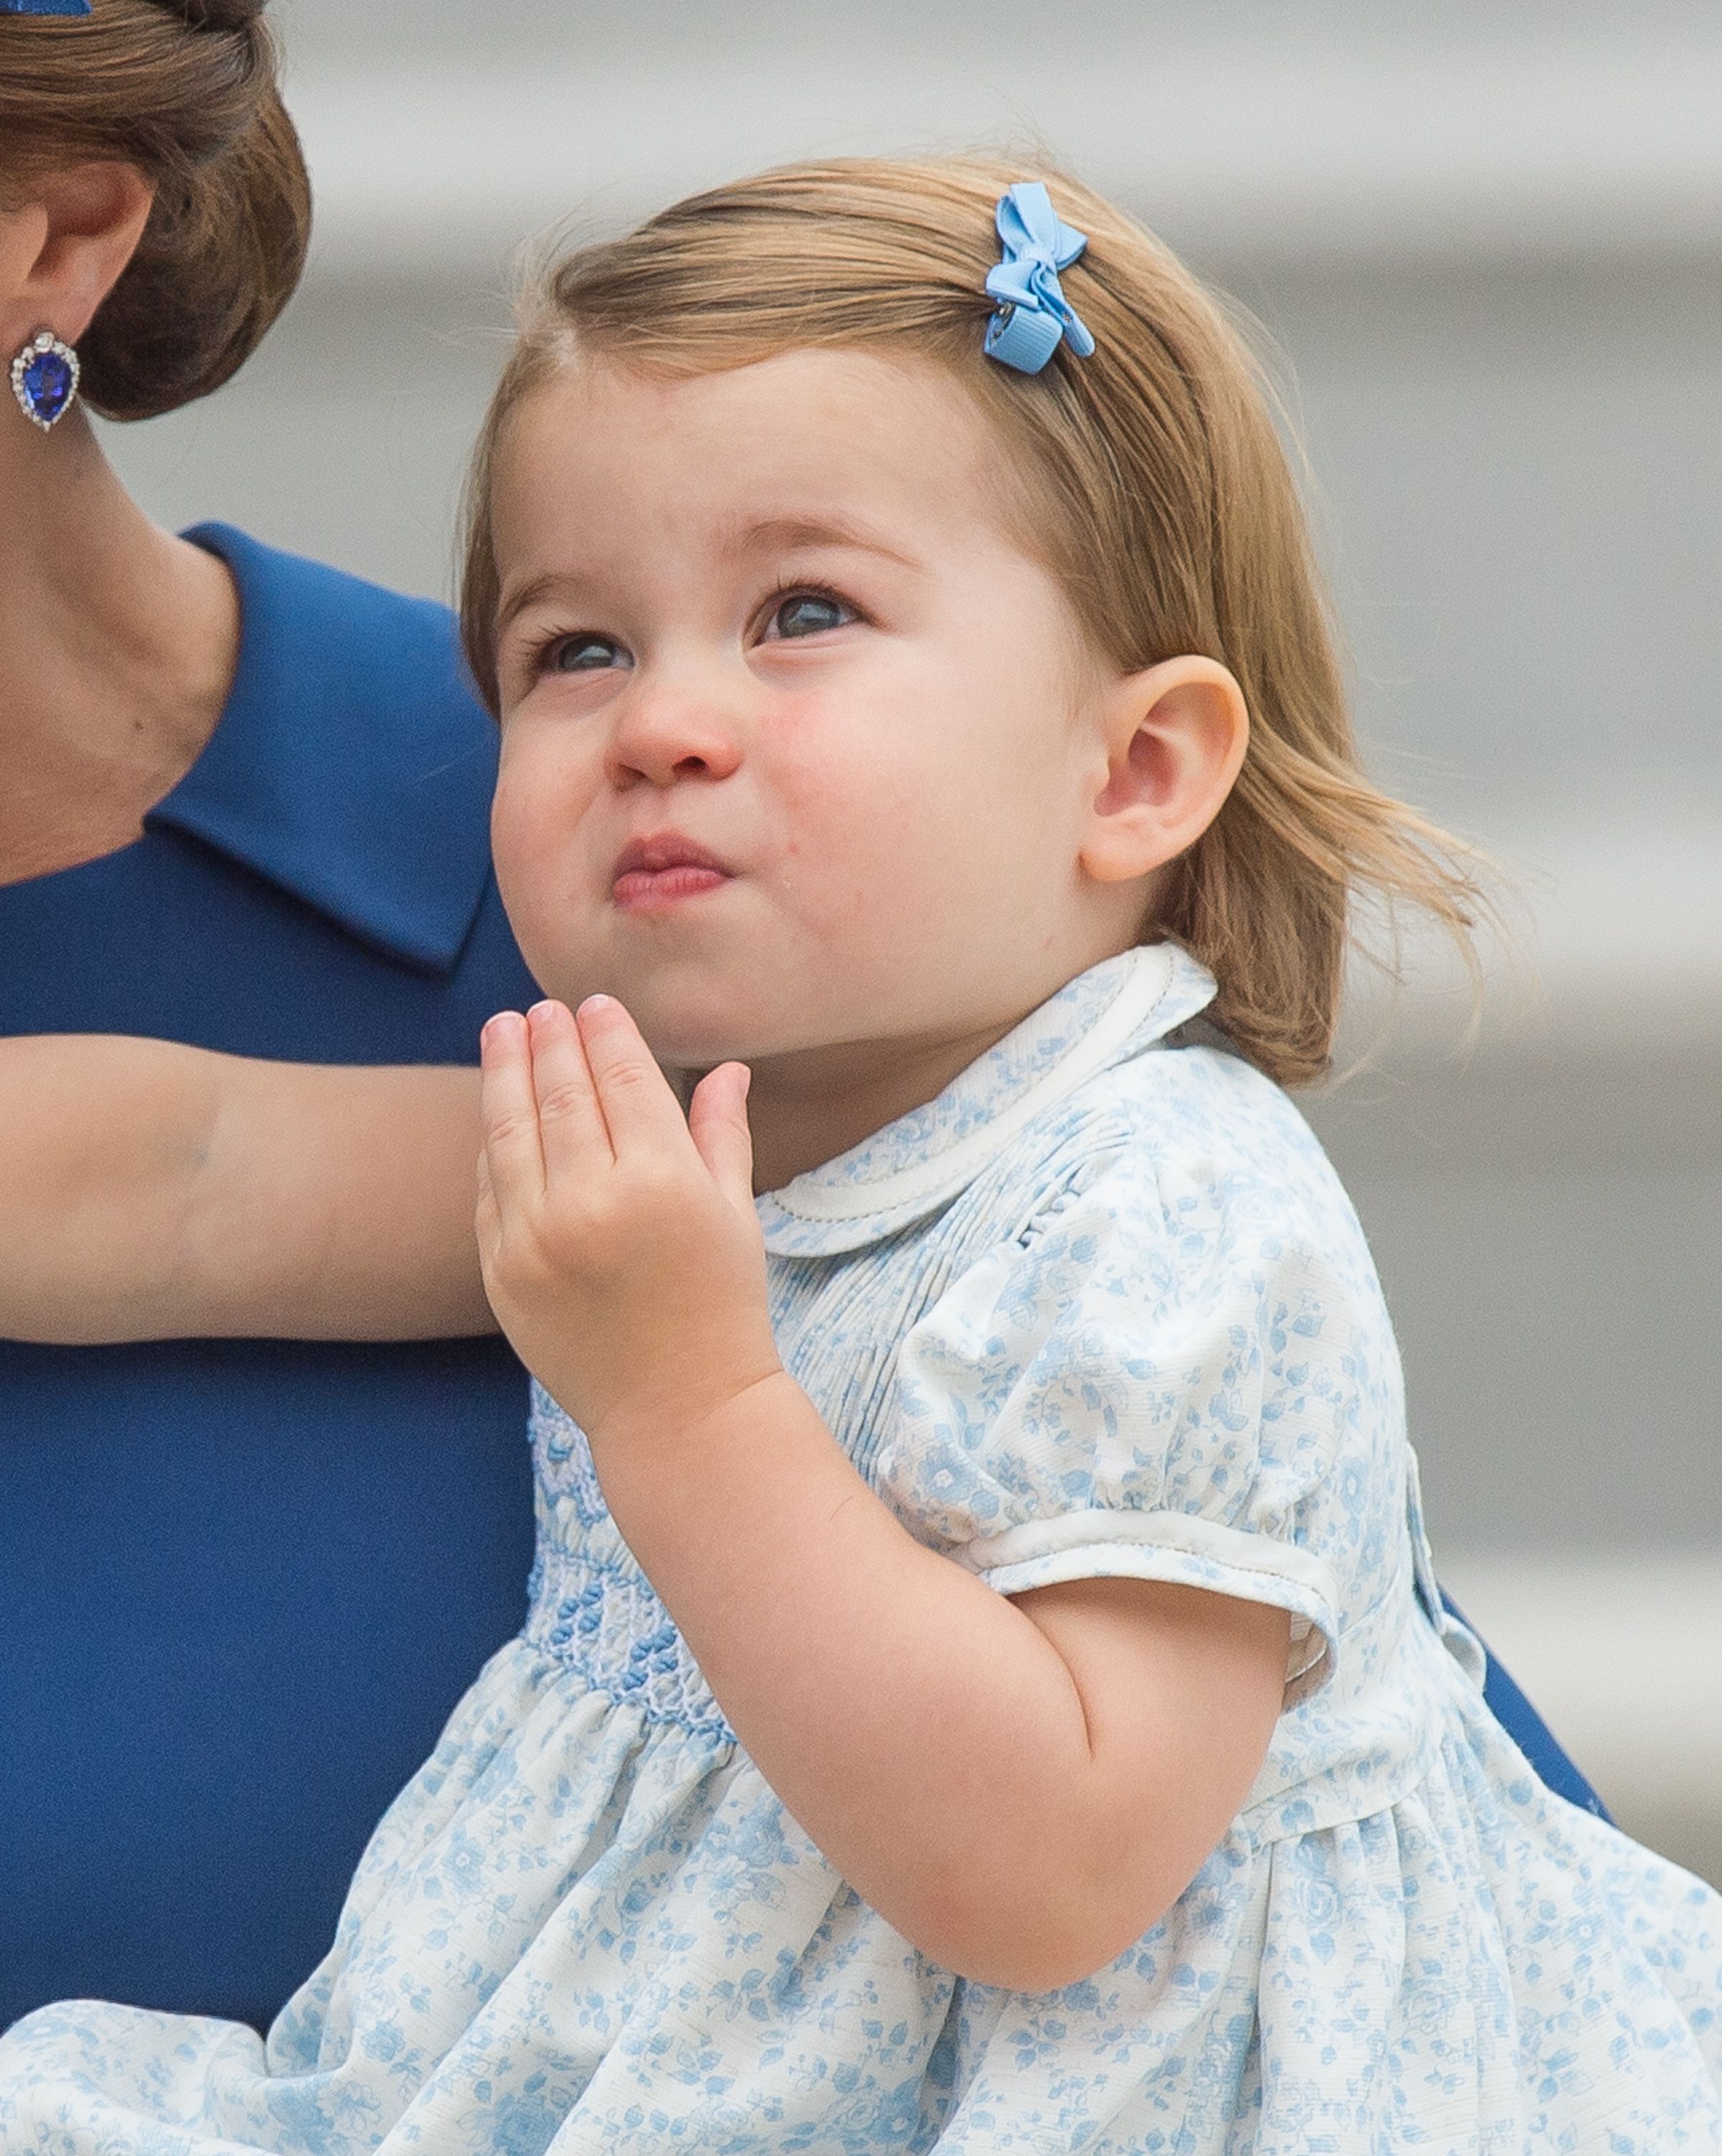 15 Photos of the Royal Kids in Fashionable Outfits - Royal Children Outfit  Inspiration